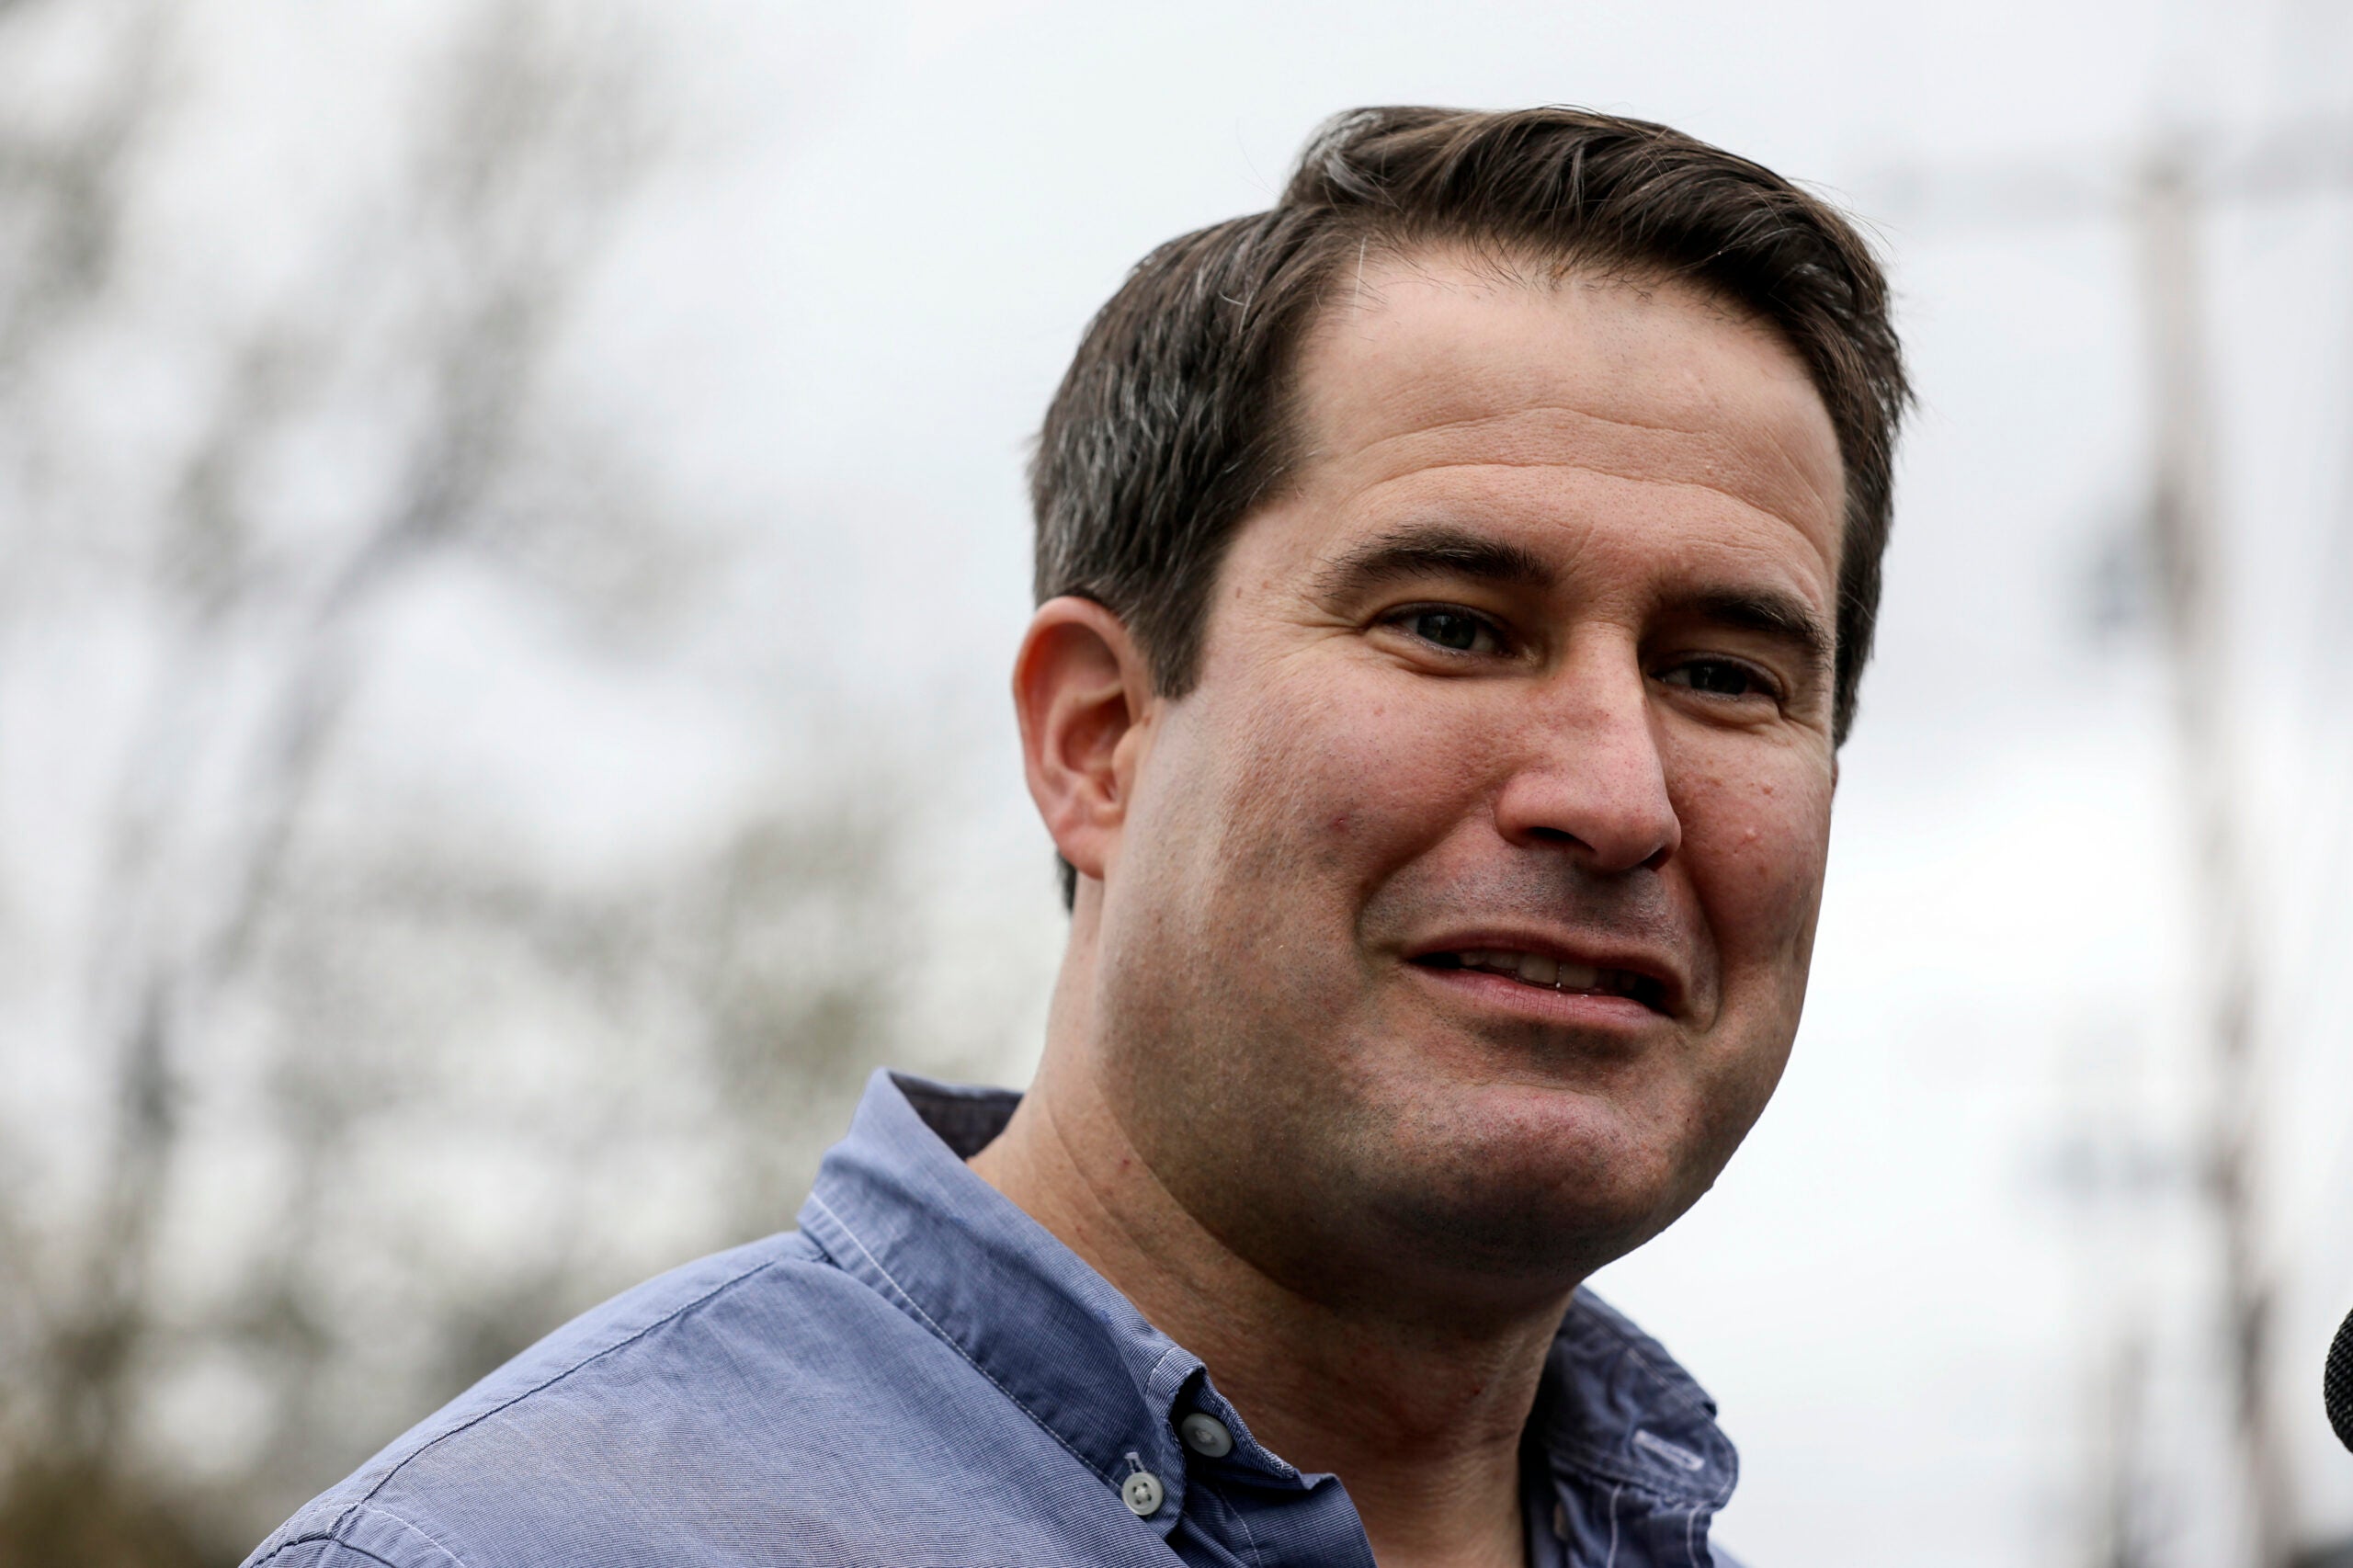 Seth Moulton Reveals Struggling With Ptsd After Iraq War